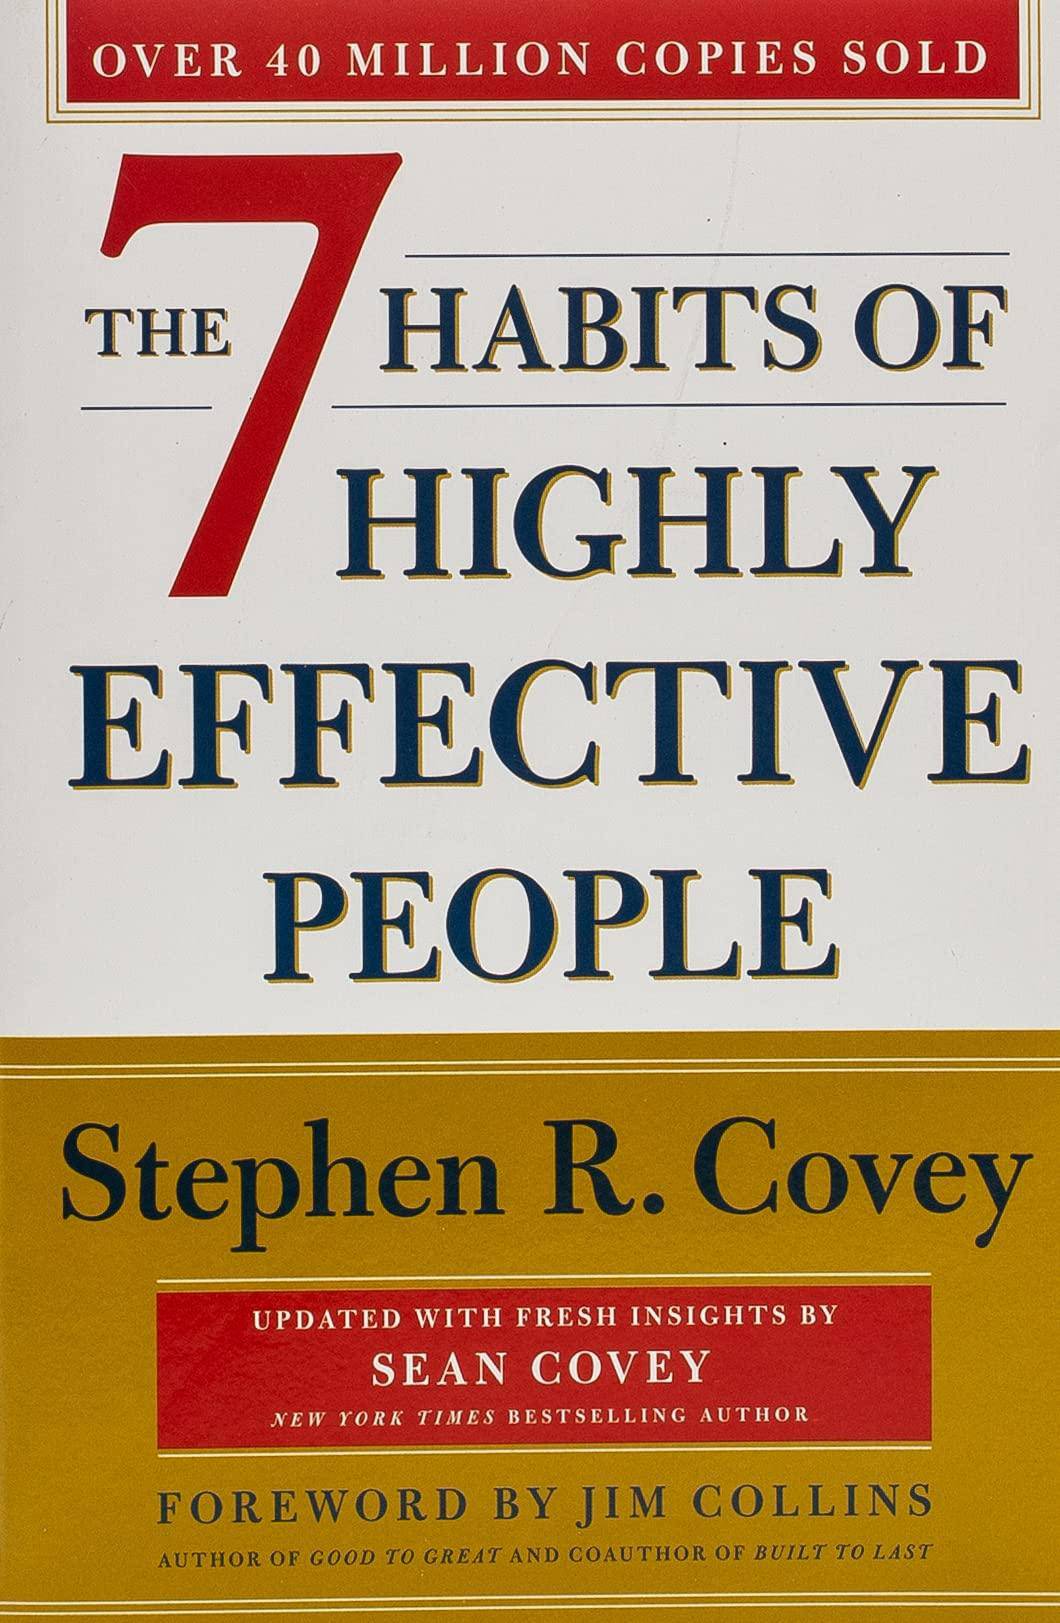 7 Habits of Highly Effective People: 30th Anniversary Edition (A - SureShot Books Publishing LLC